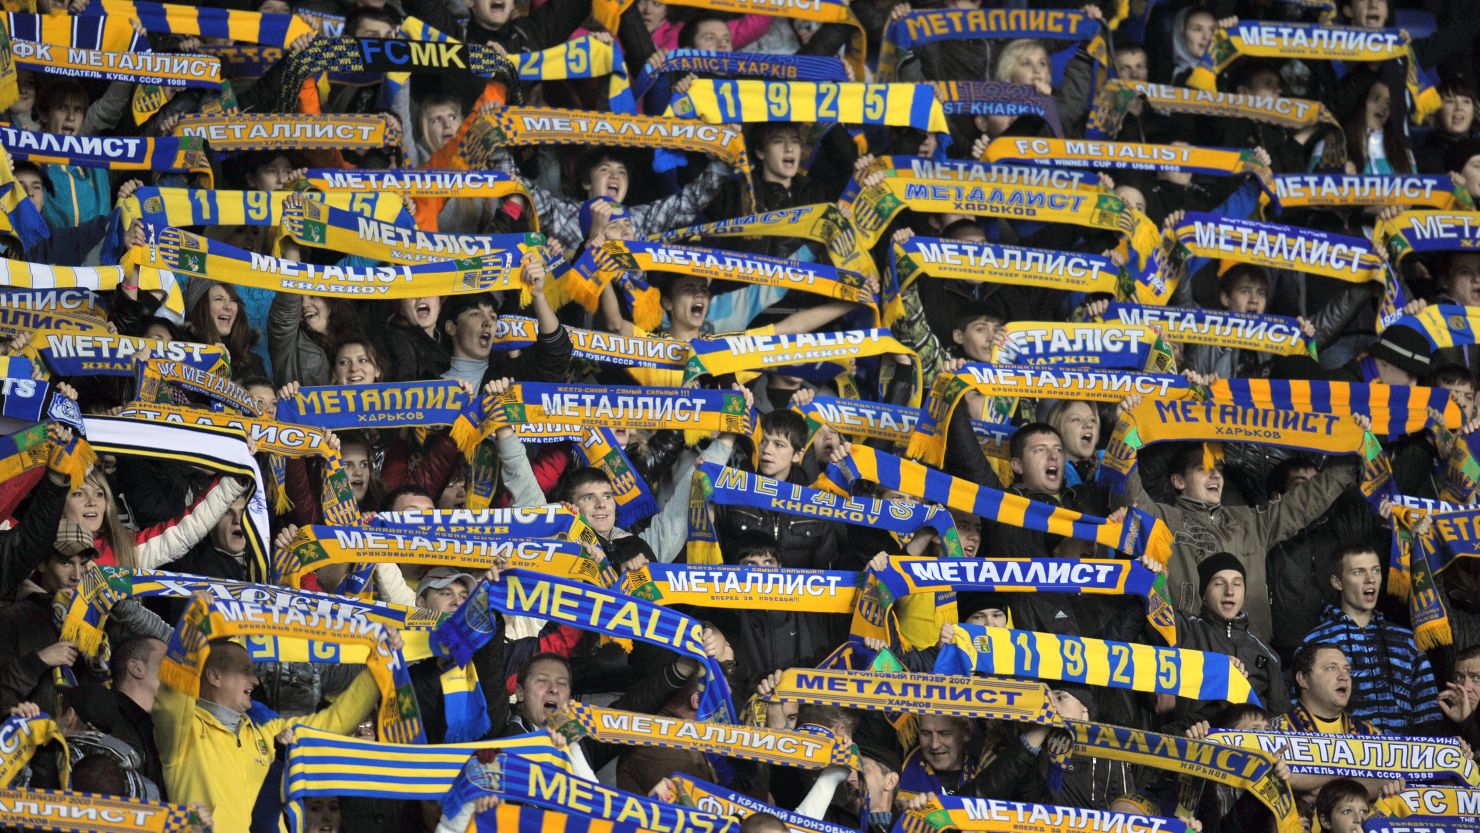 Metalist Kharkiv were knocked out of the UEFA Europa League in 2012/13 by English club Newcastle United.